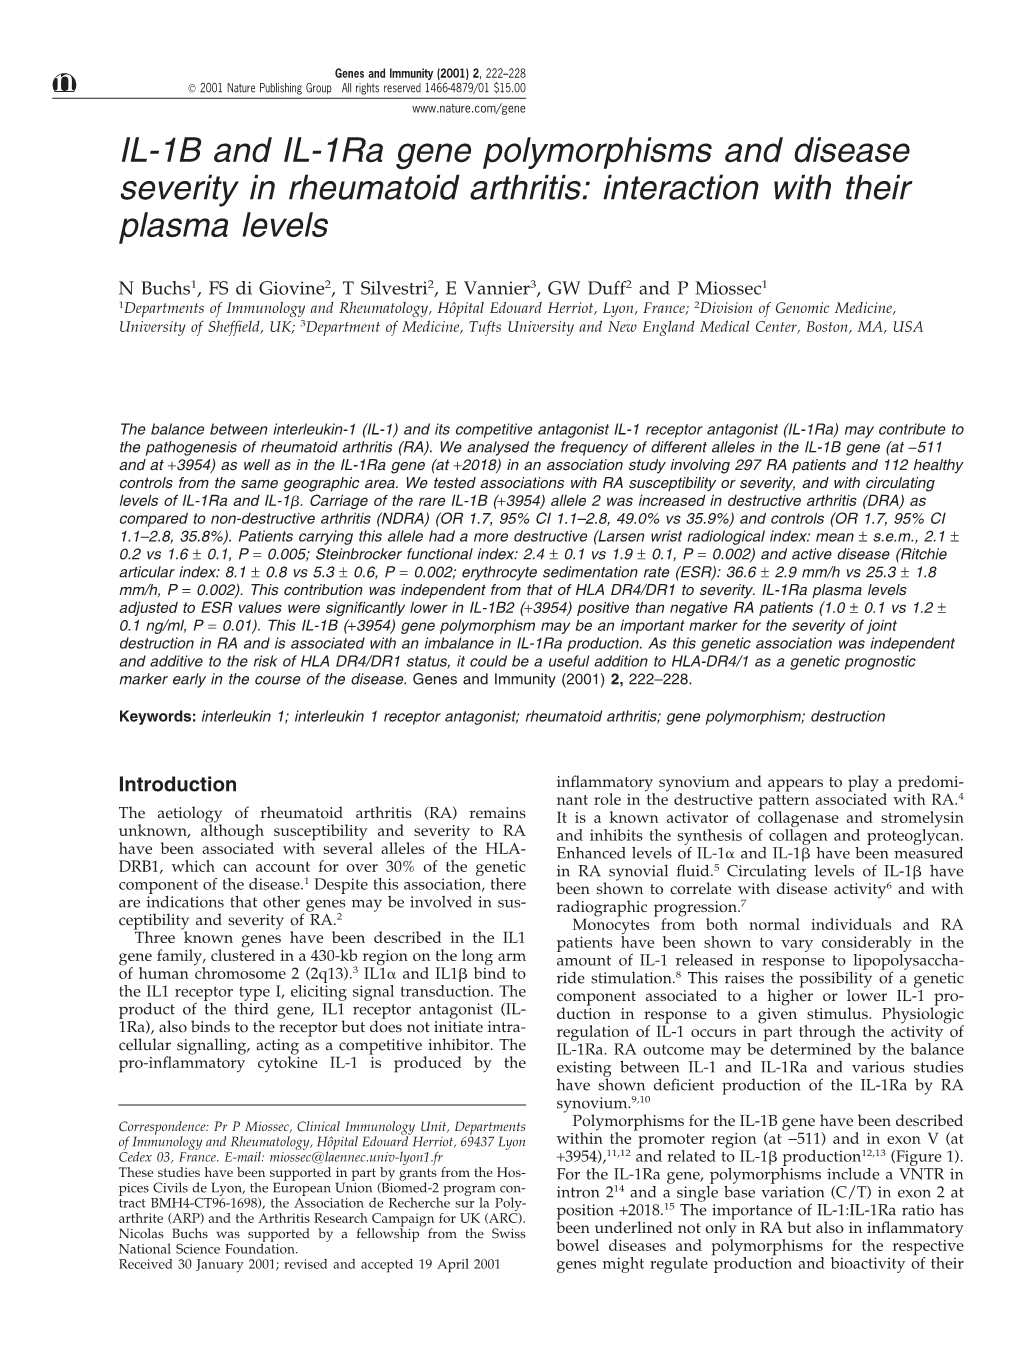 IL-1B and IL-1Ra Gene Polymorphisms and Disease Severity in Rheumatoid Arthritis: Interaction with Their Plasma Levels